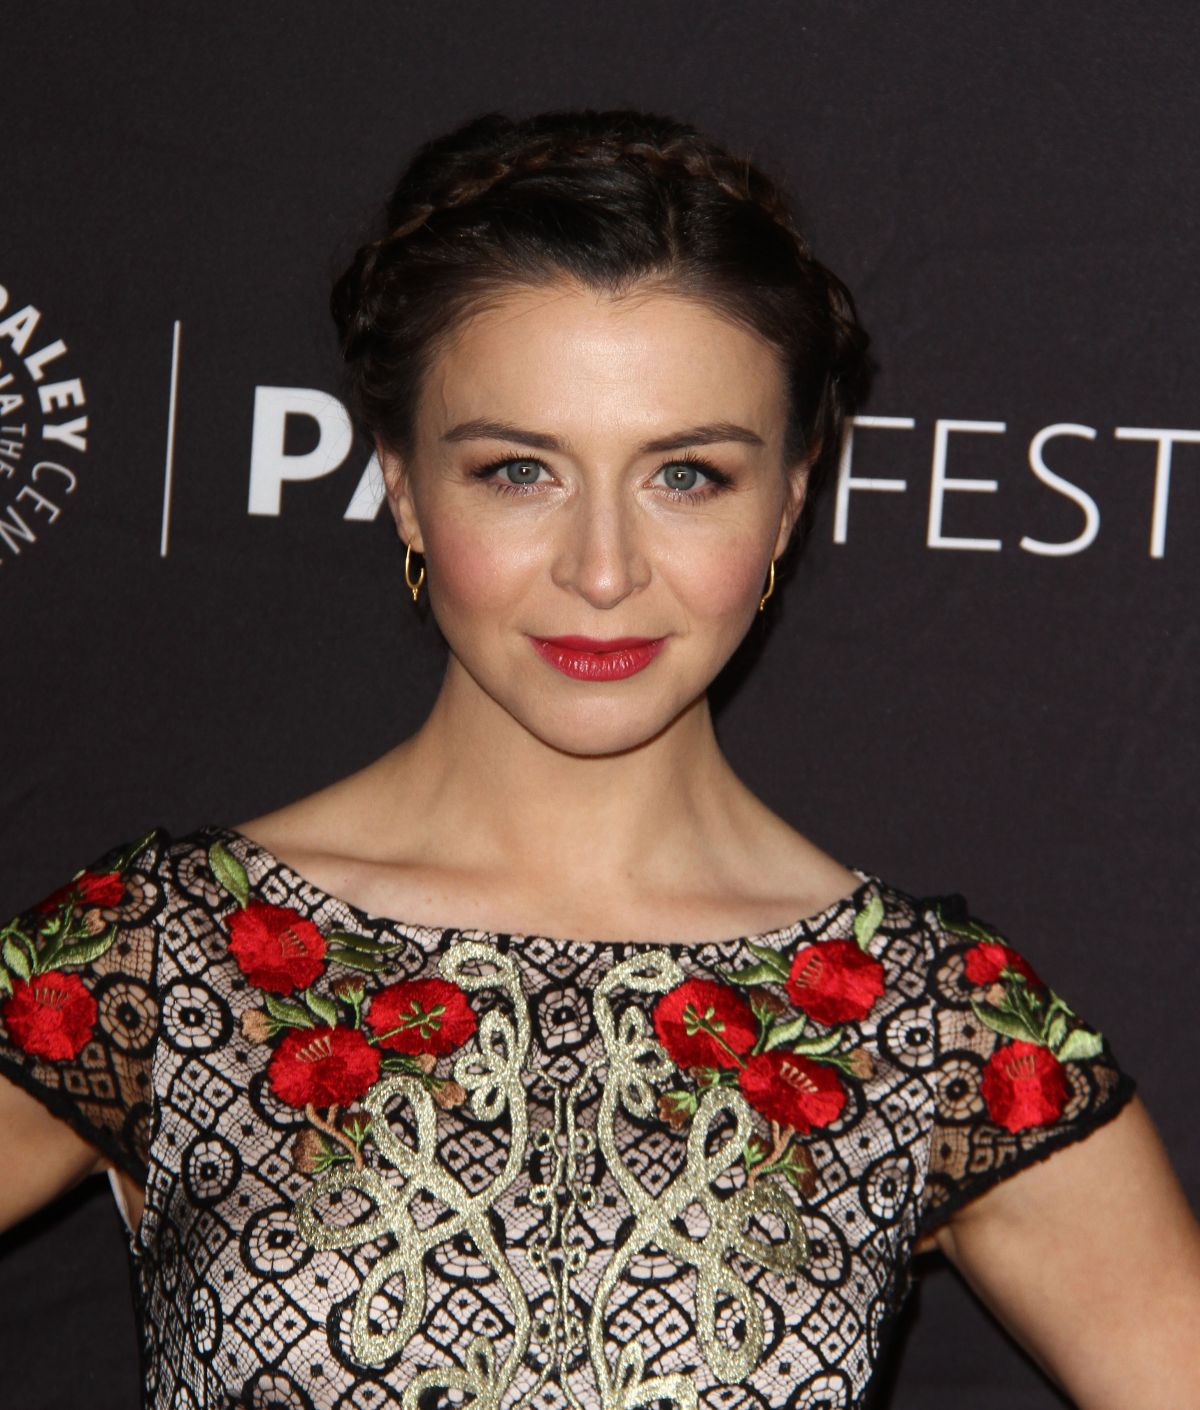 caterina-scorsone-at-34th-annual-paleyfest-in-los-angeles-03-19-2017_3.